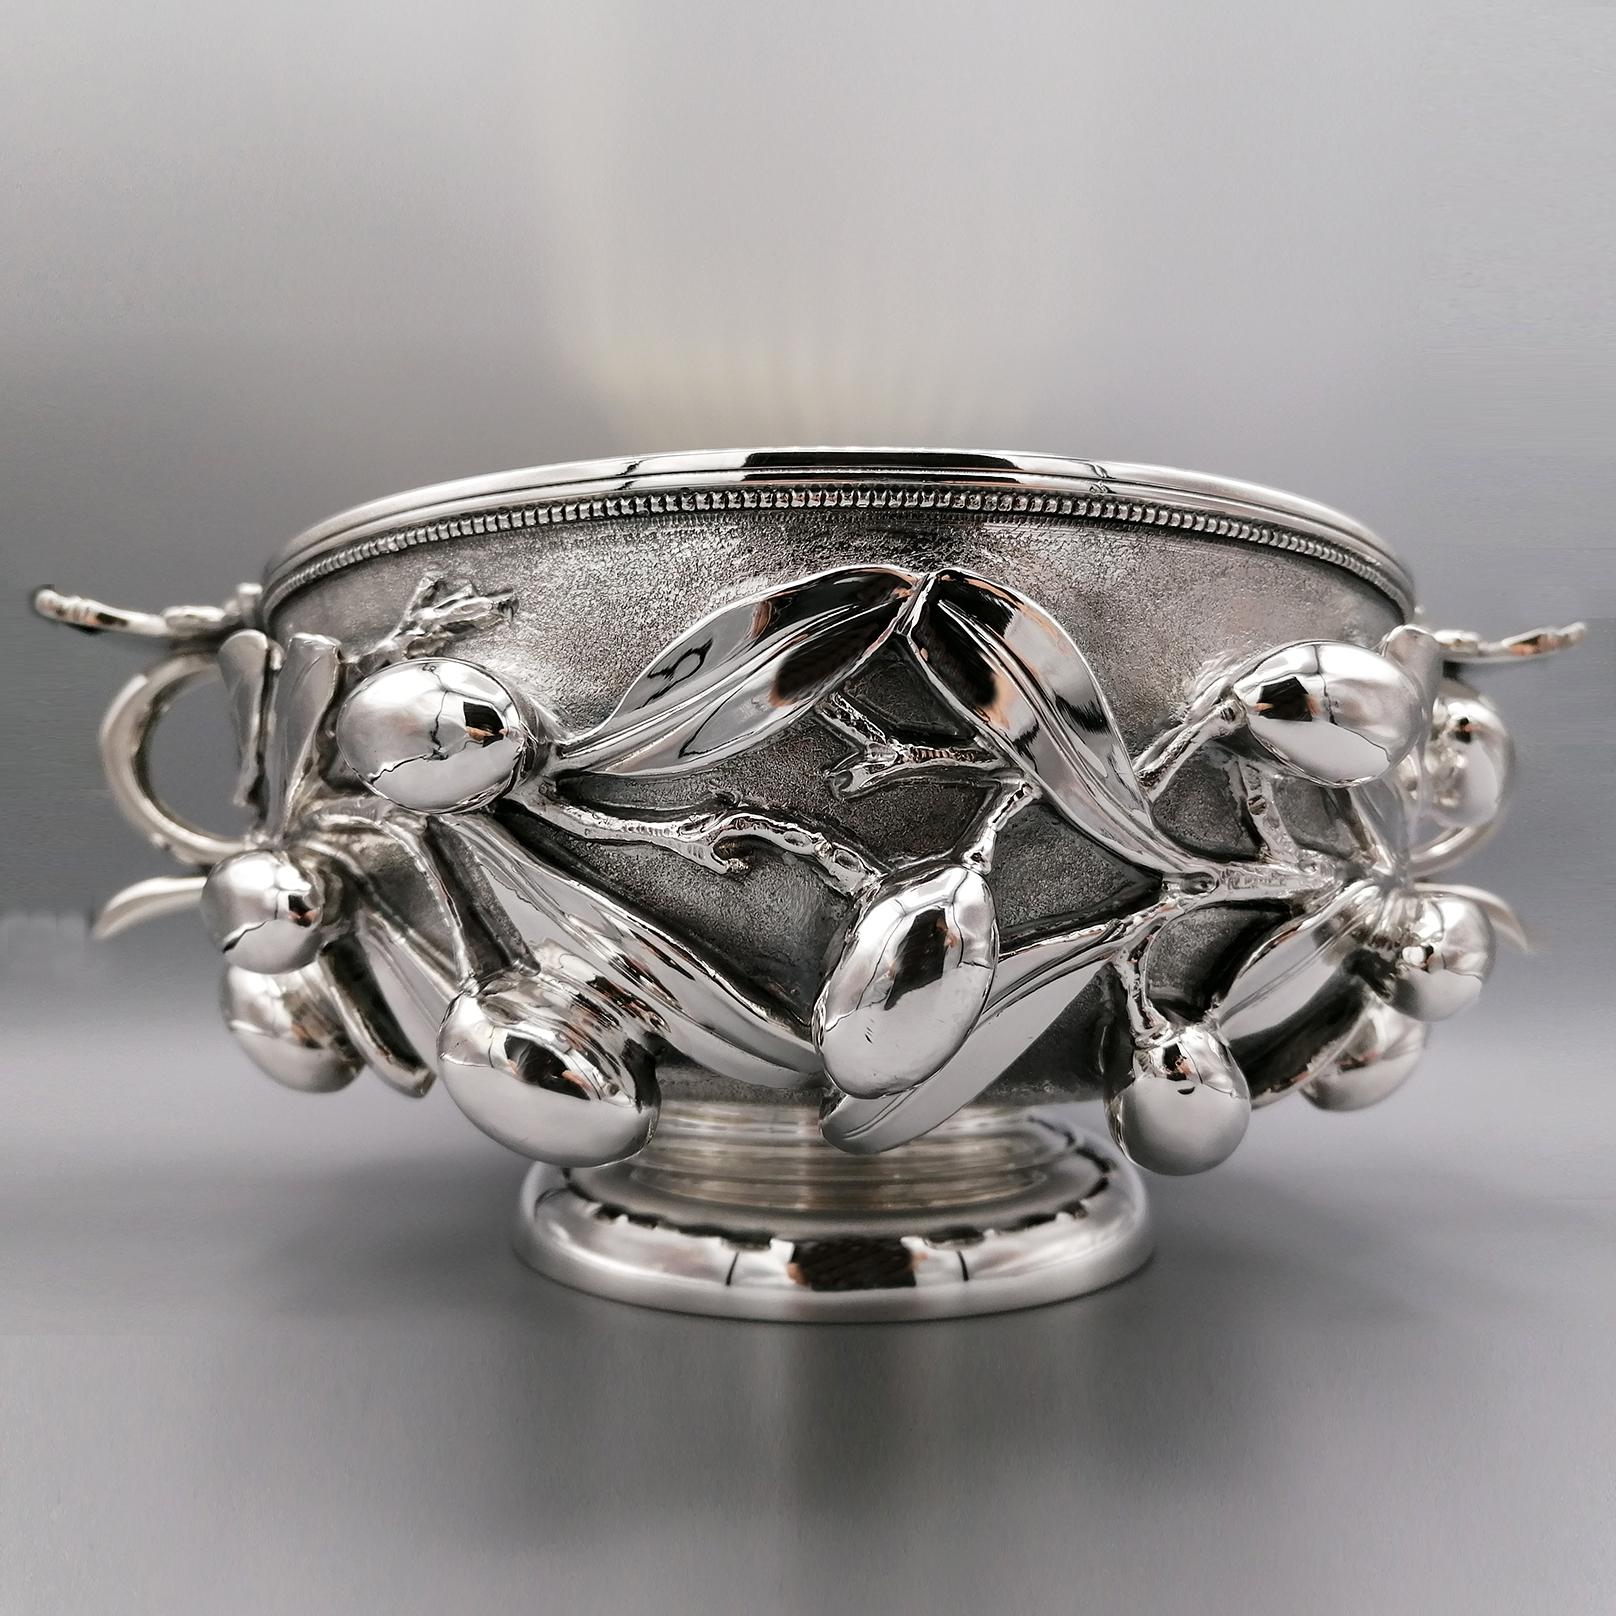 Hand-Crafted 20th Century Italian Sterling Silver Bowl with Handles, Roman Replica For Sale